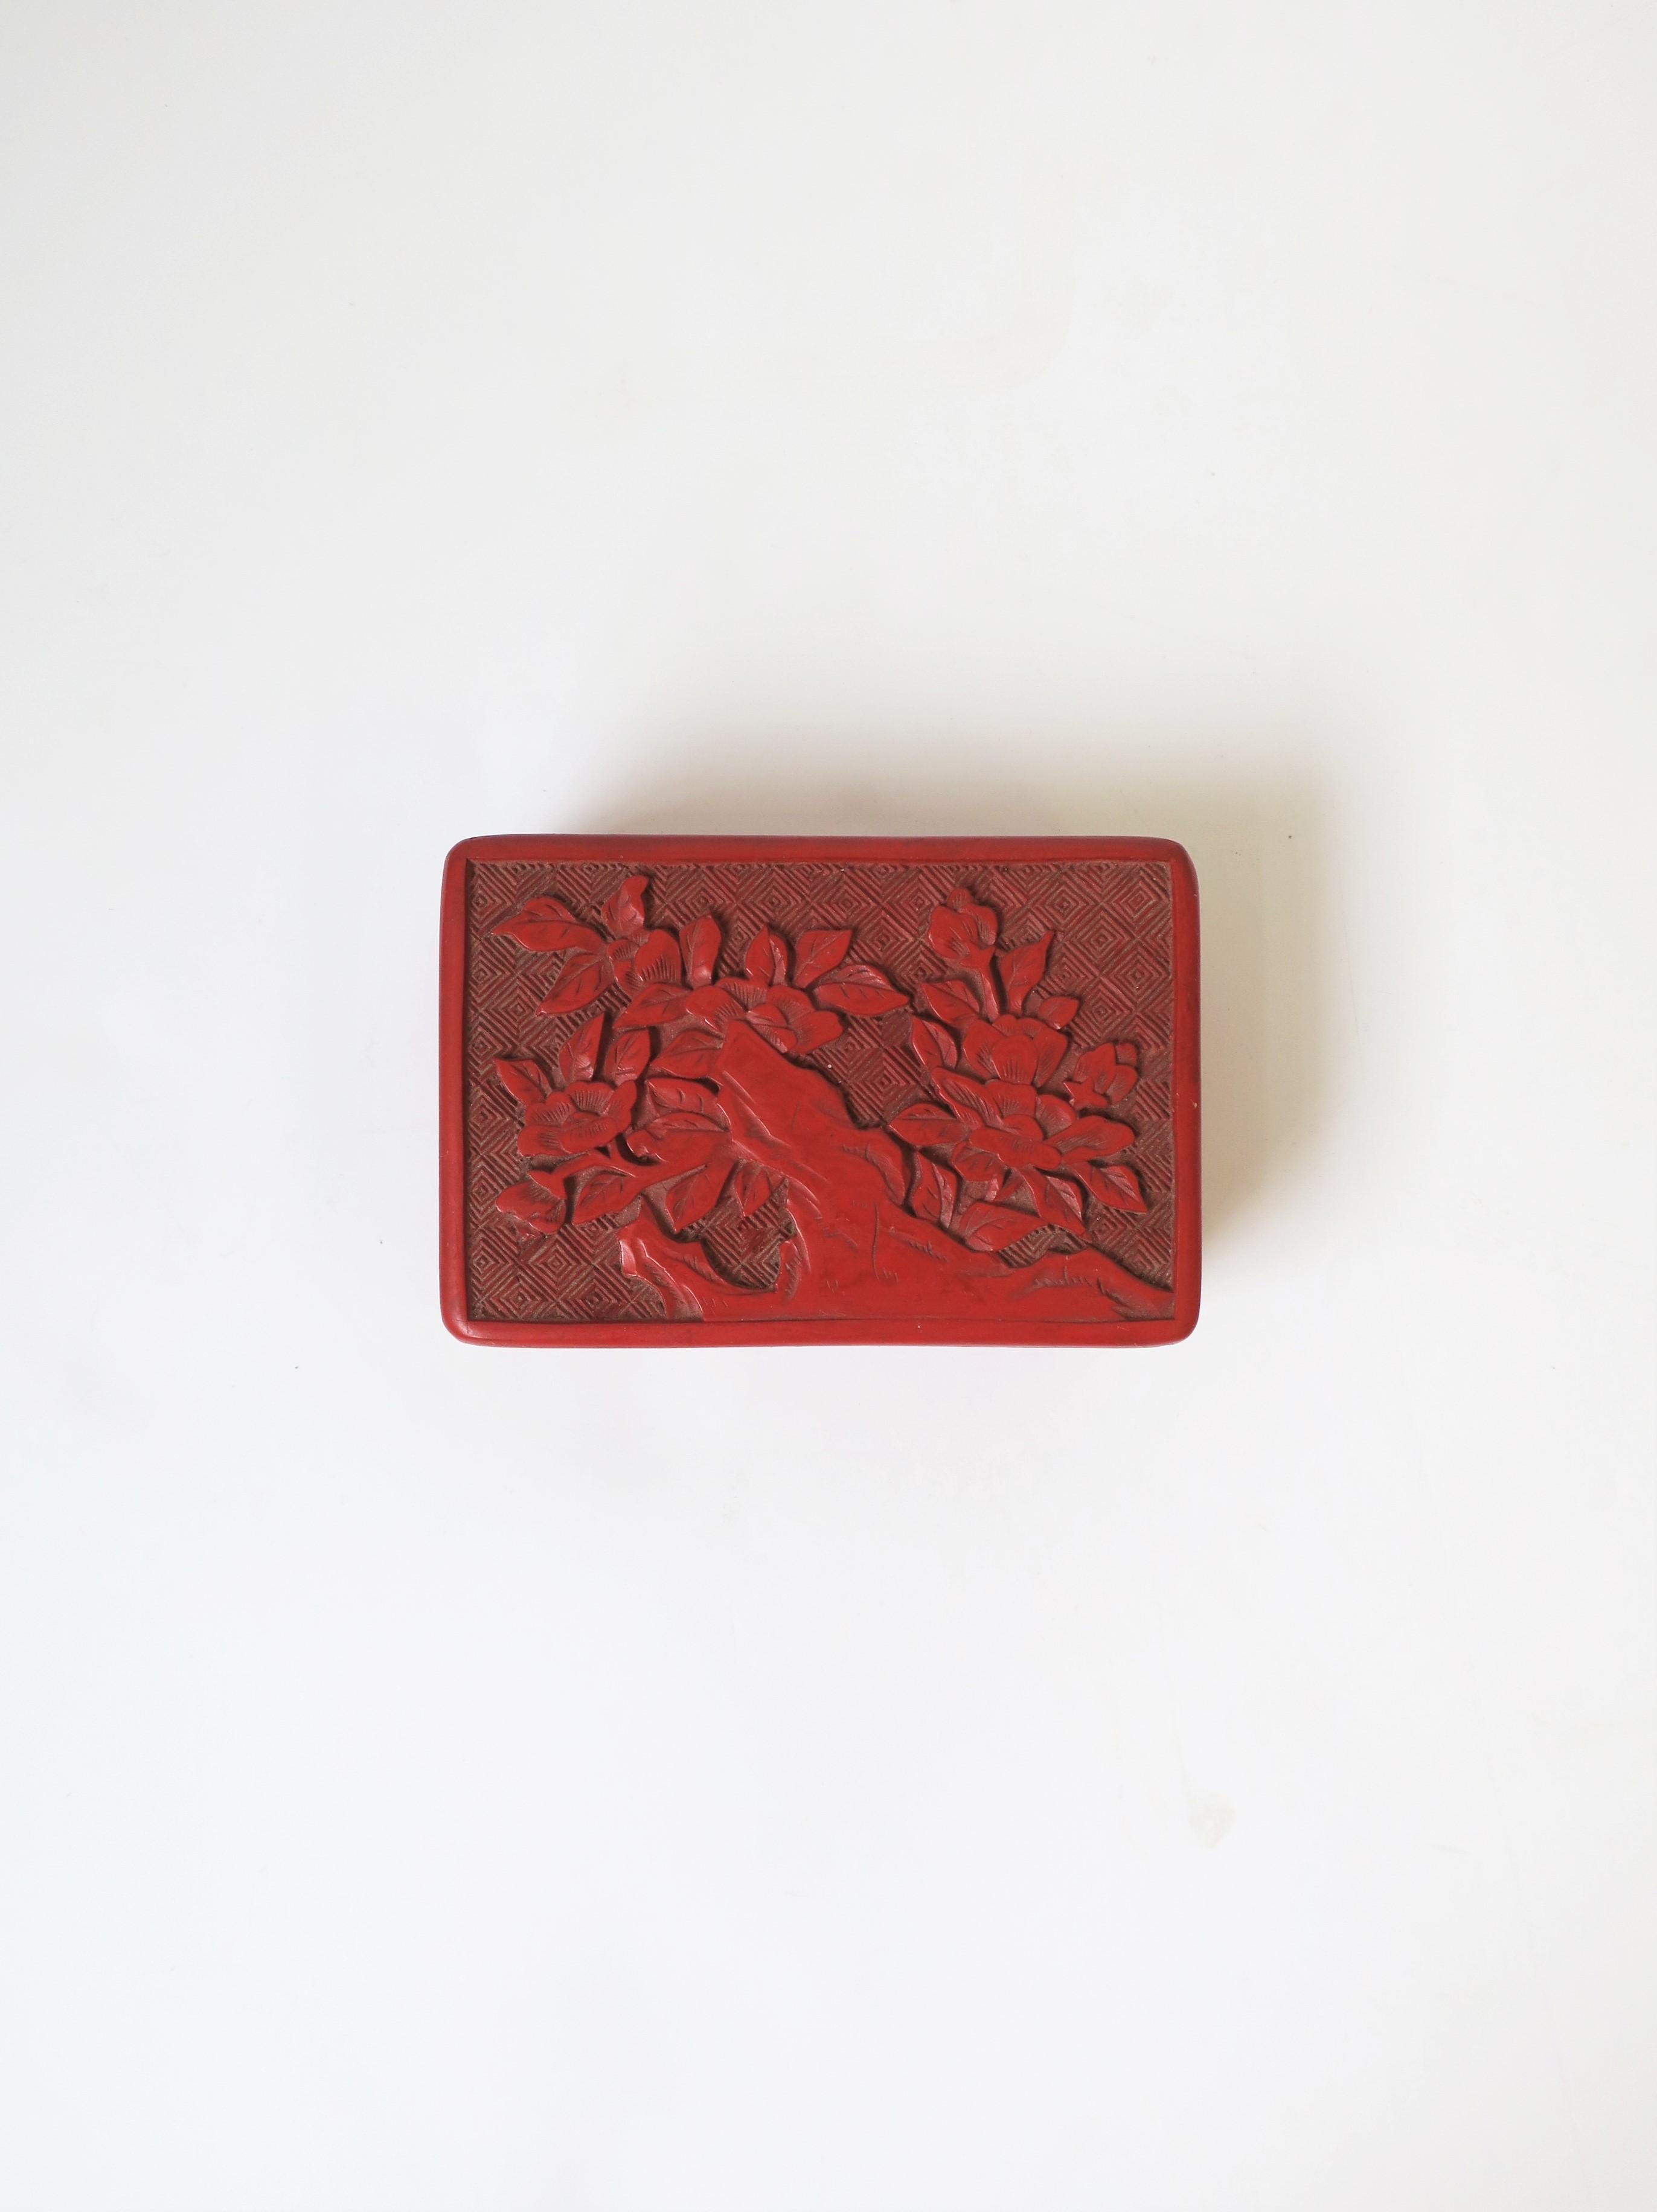 A beautiful Chinese red cinnabar box with a tree and leave design, black lacquer interior and bottom, circa 20th century China. Dimensions: 2.75